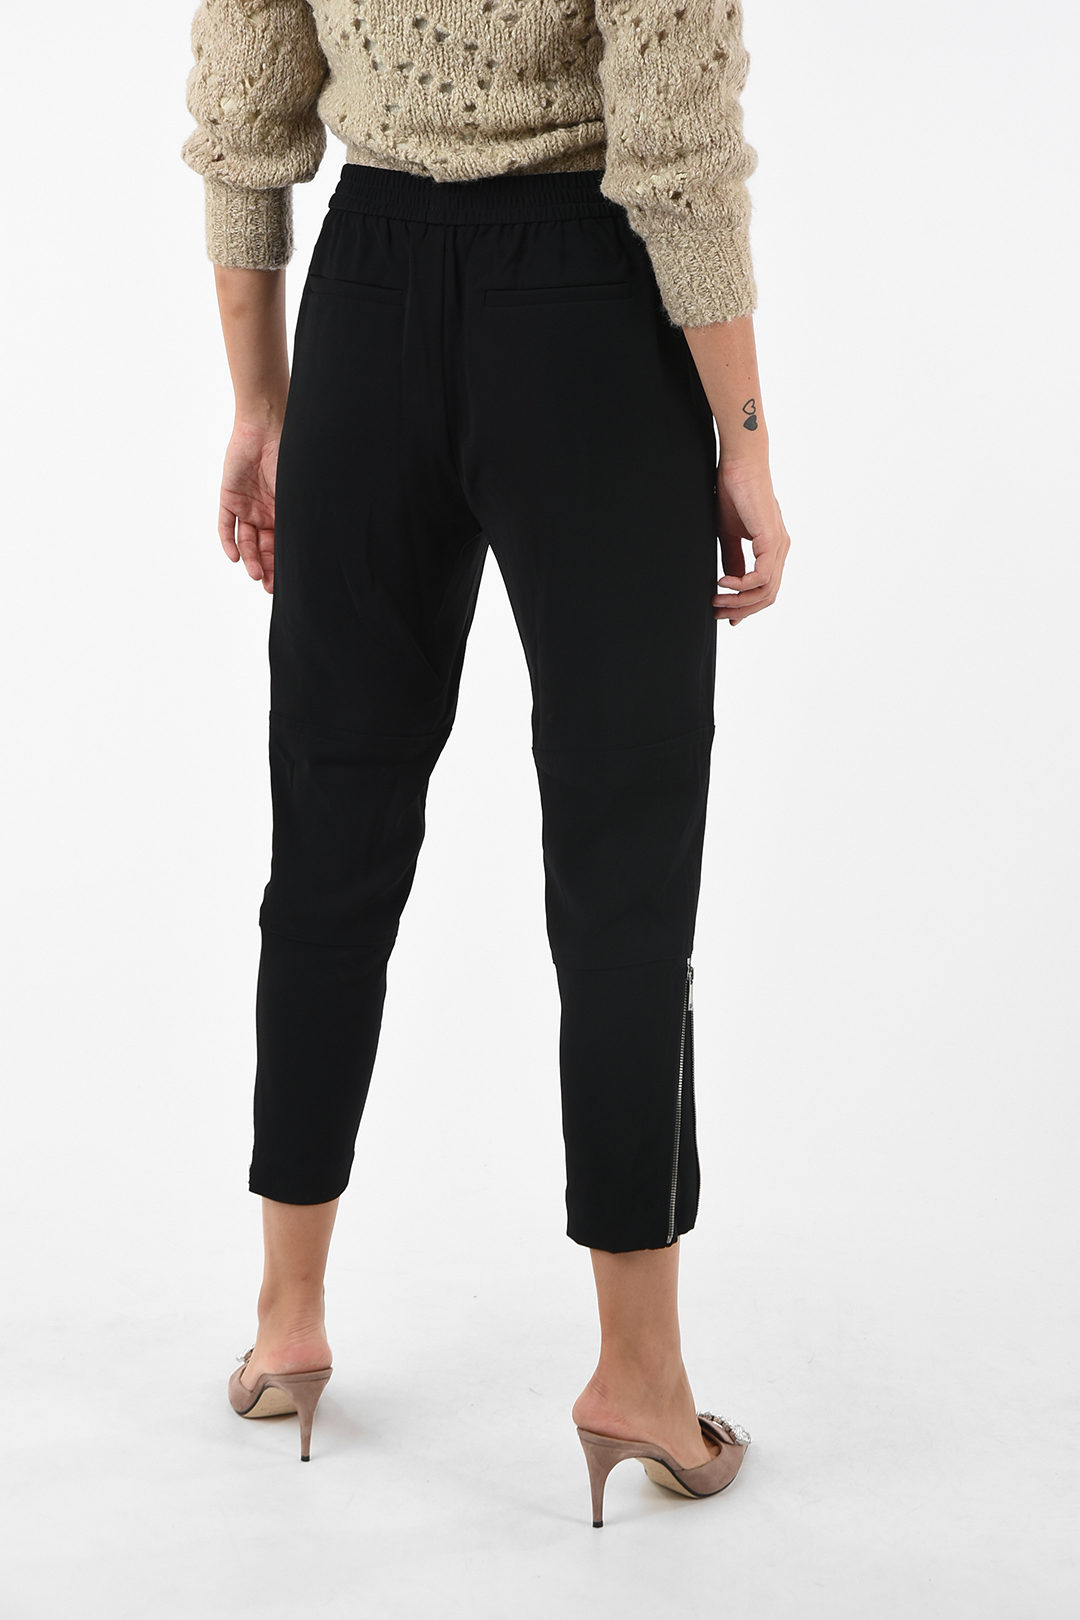 Michael Kors Cargo Pants with Ankle Zip Closure women - Glamood Outlet